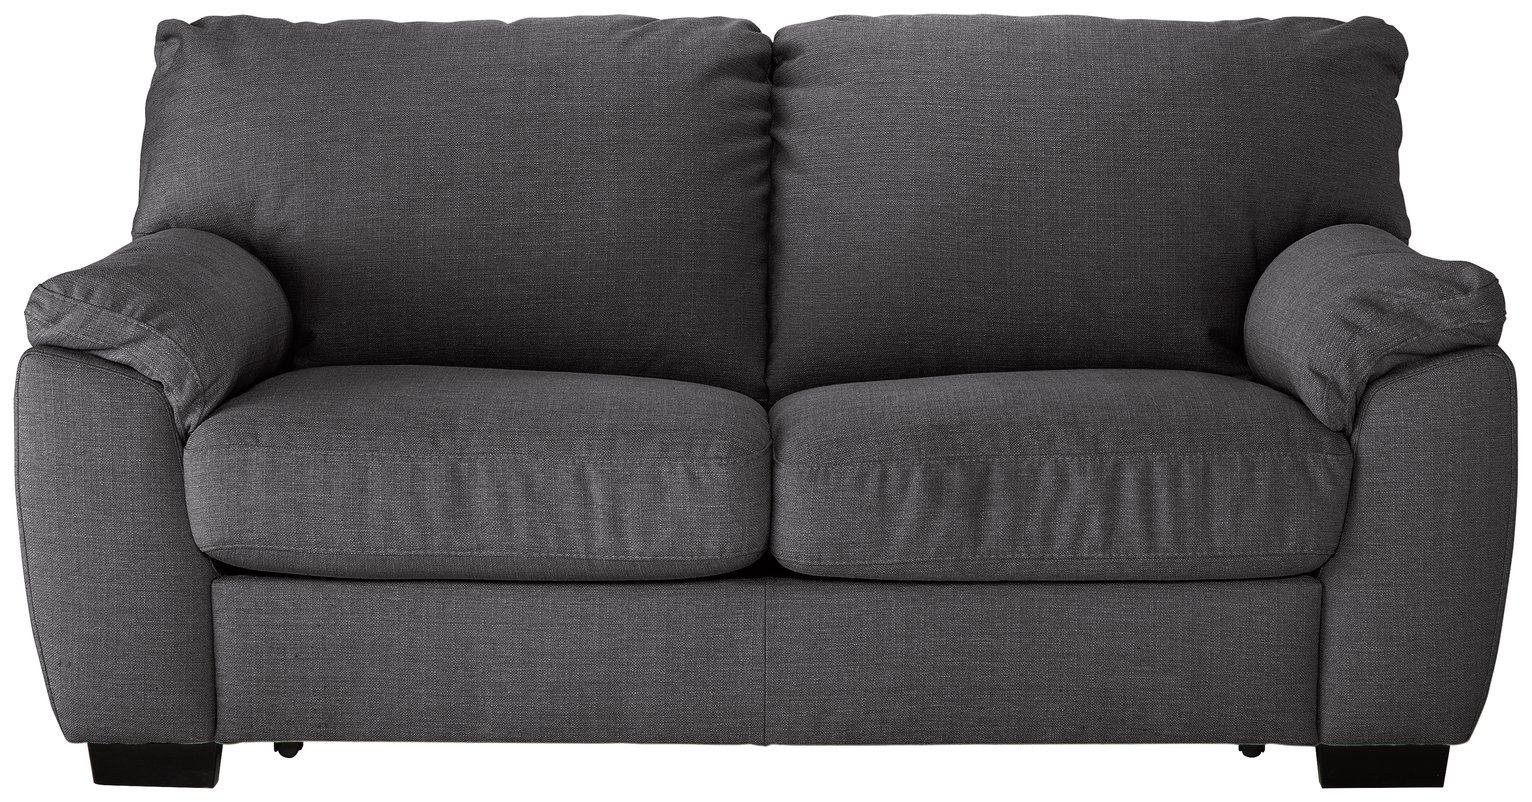 Argos Home Milano 2 Seater Fabric Sofa Bed - Charcoal